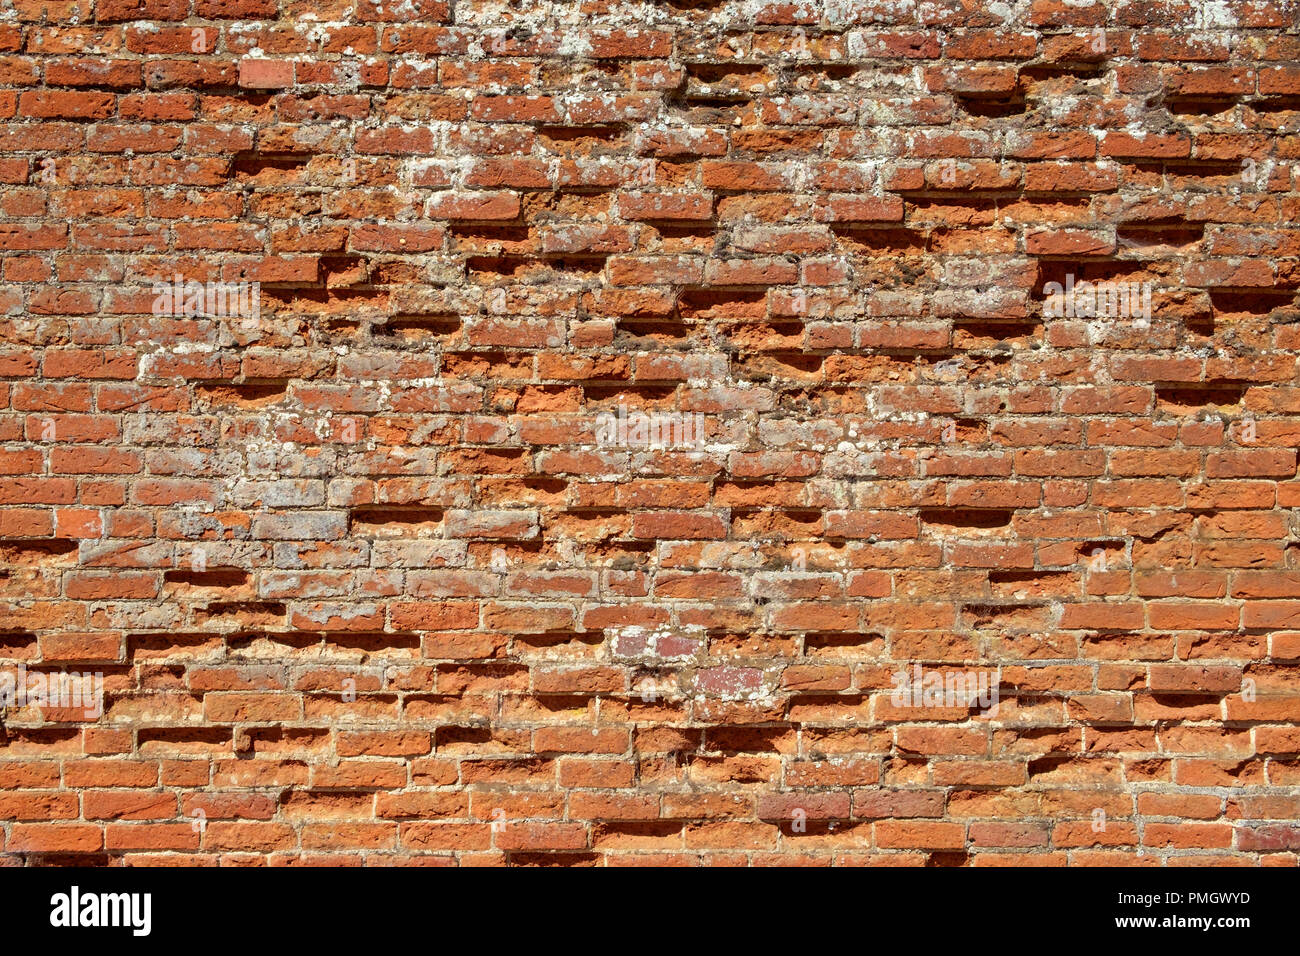 Very old weathered, damaged, badly repaired red brick wall close up full frame background Stock Photo